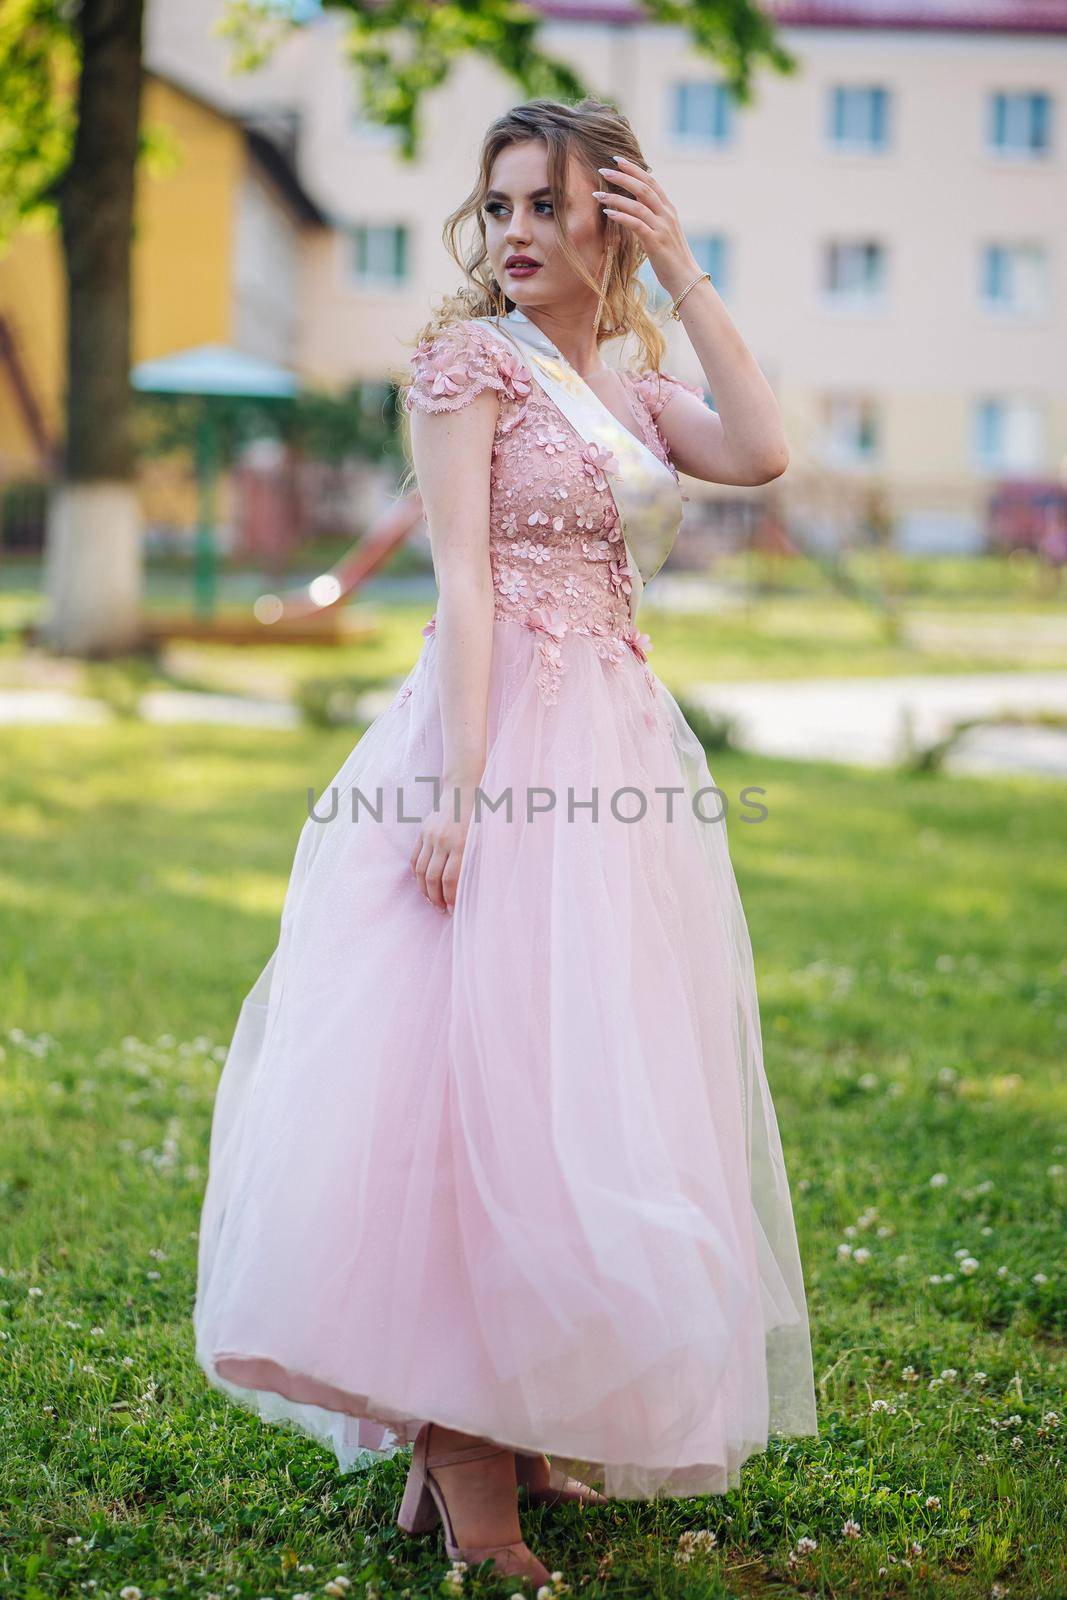 Beautiful schoolgirl in dress at the prom at school. by DovidPro